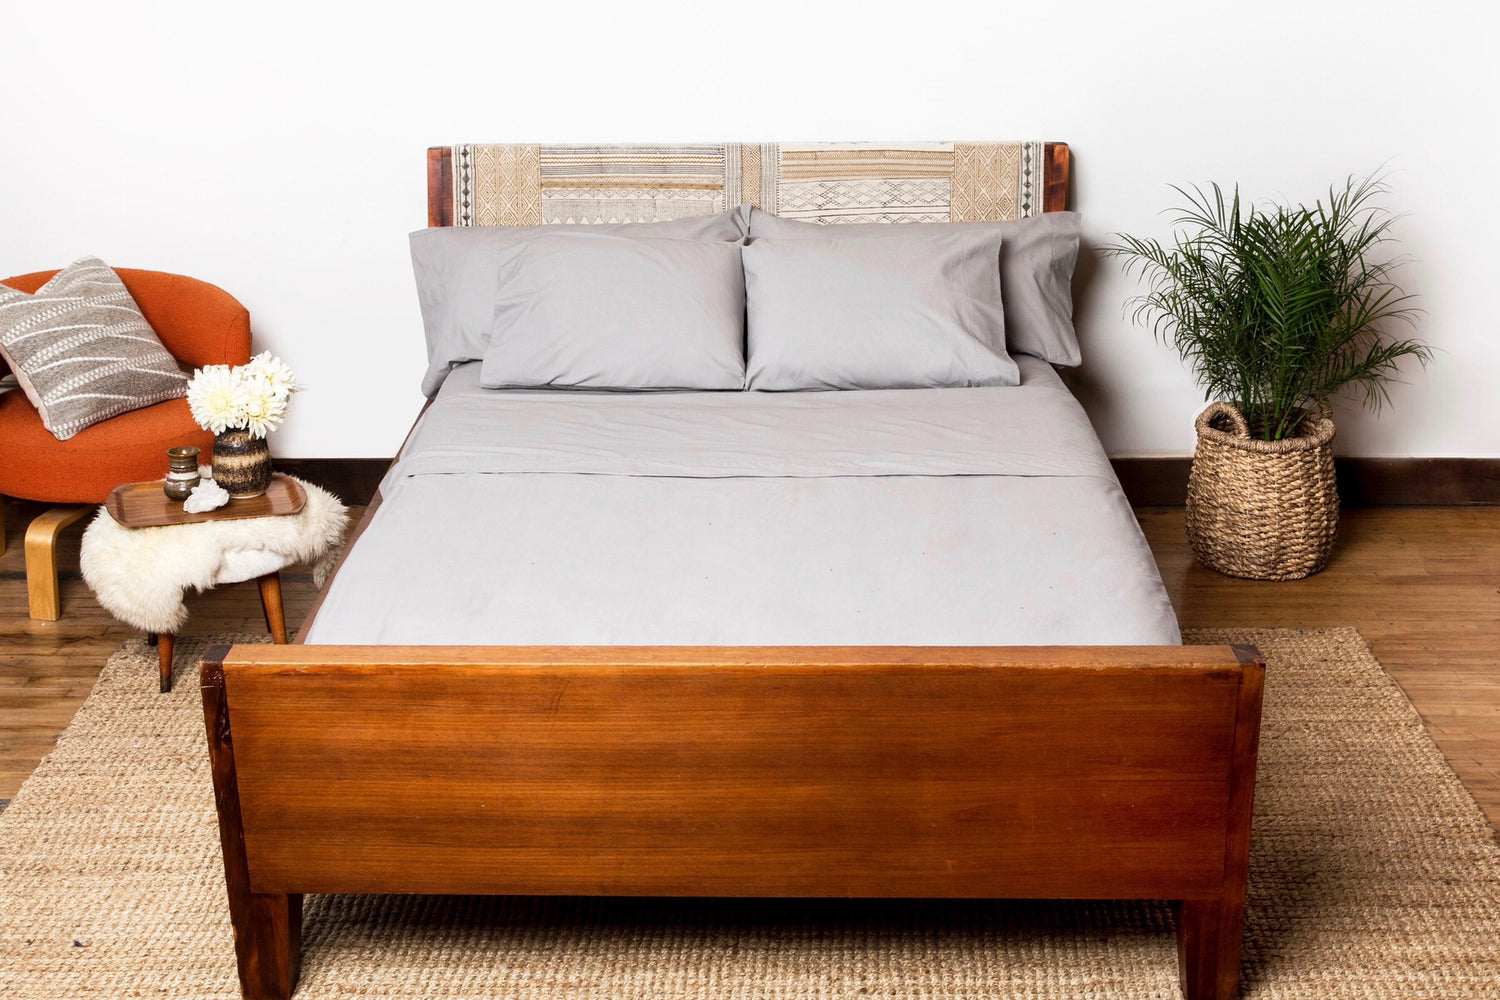 Everything You Need to Know About Thread Count for Bed Sheets